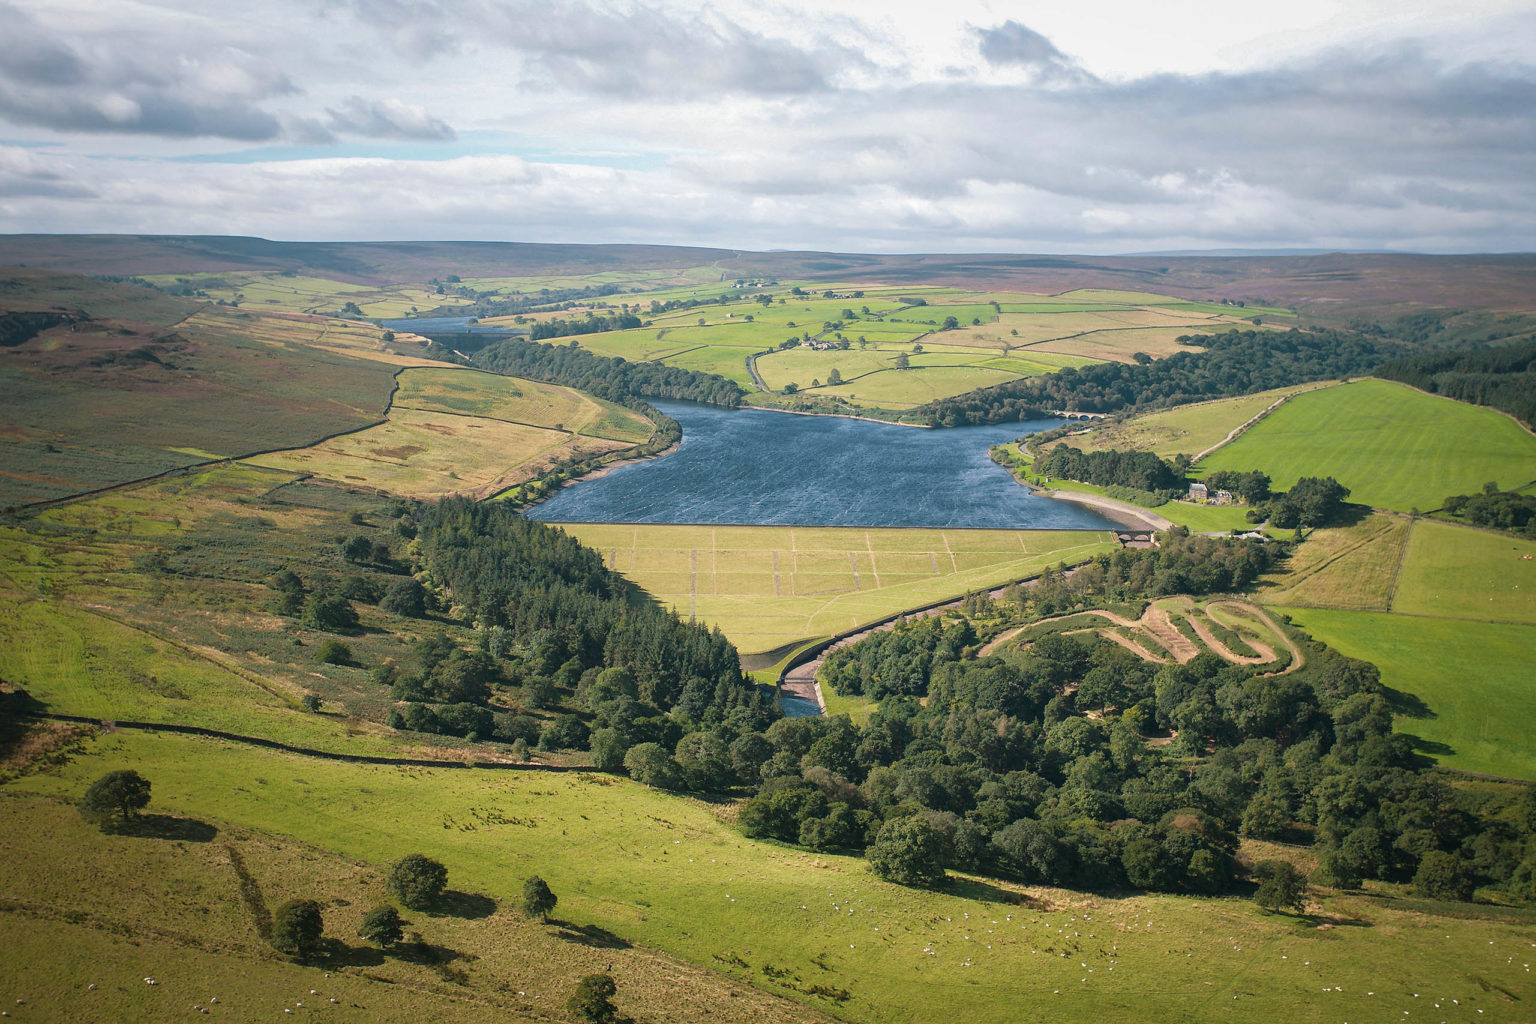 Aerial photo of Leighton Reservoir on the Swinton Estate in North Yorkshire